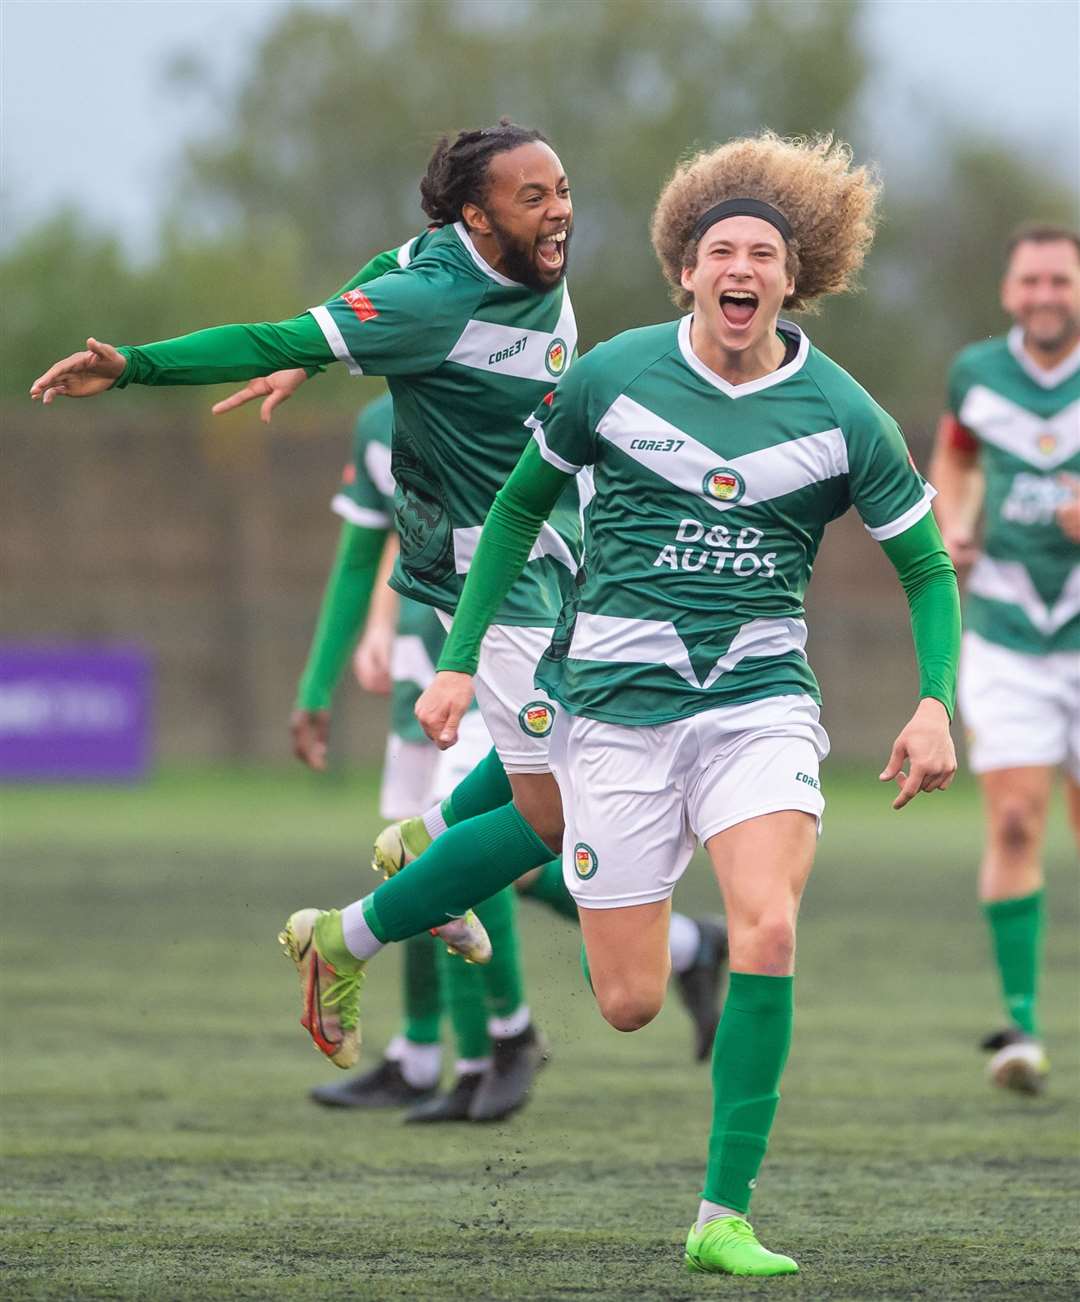 Jarred Trespaderne celebrates scoring in his first game since rejoining Ashford from Hythe. Picture: Ian Scammell